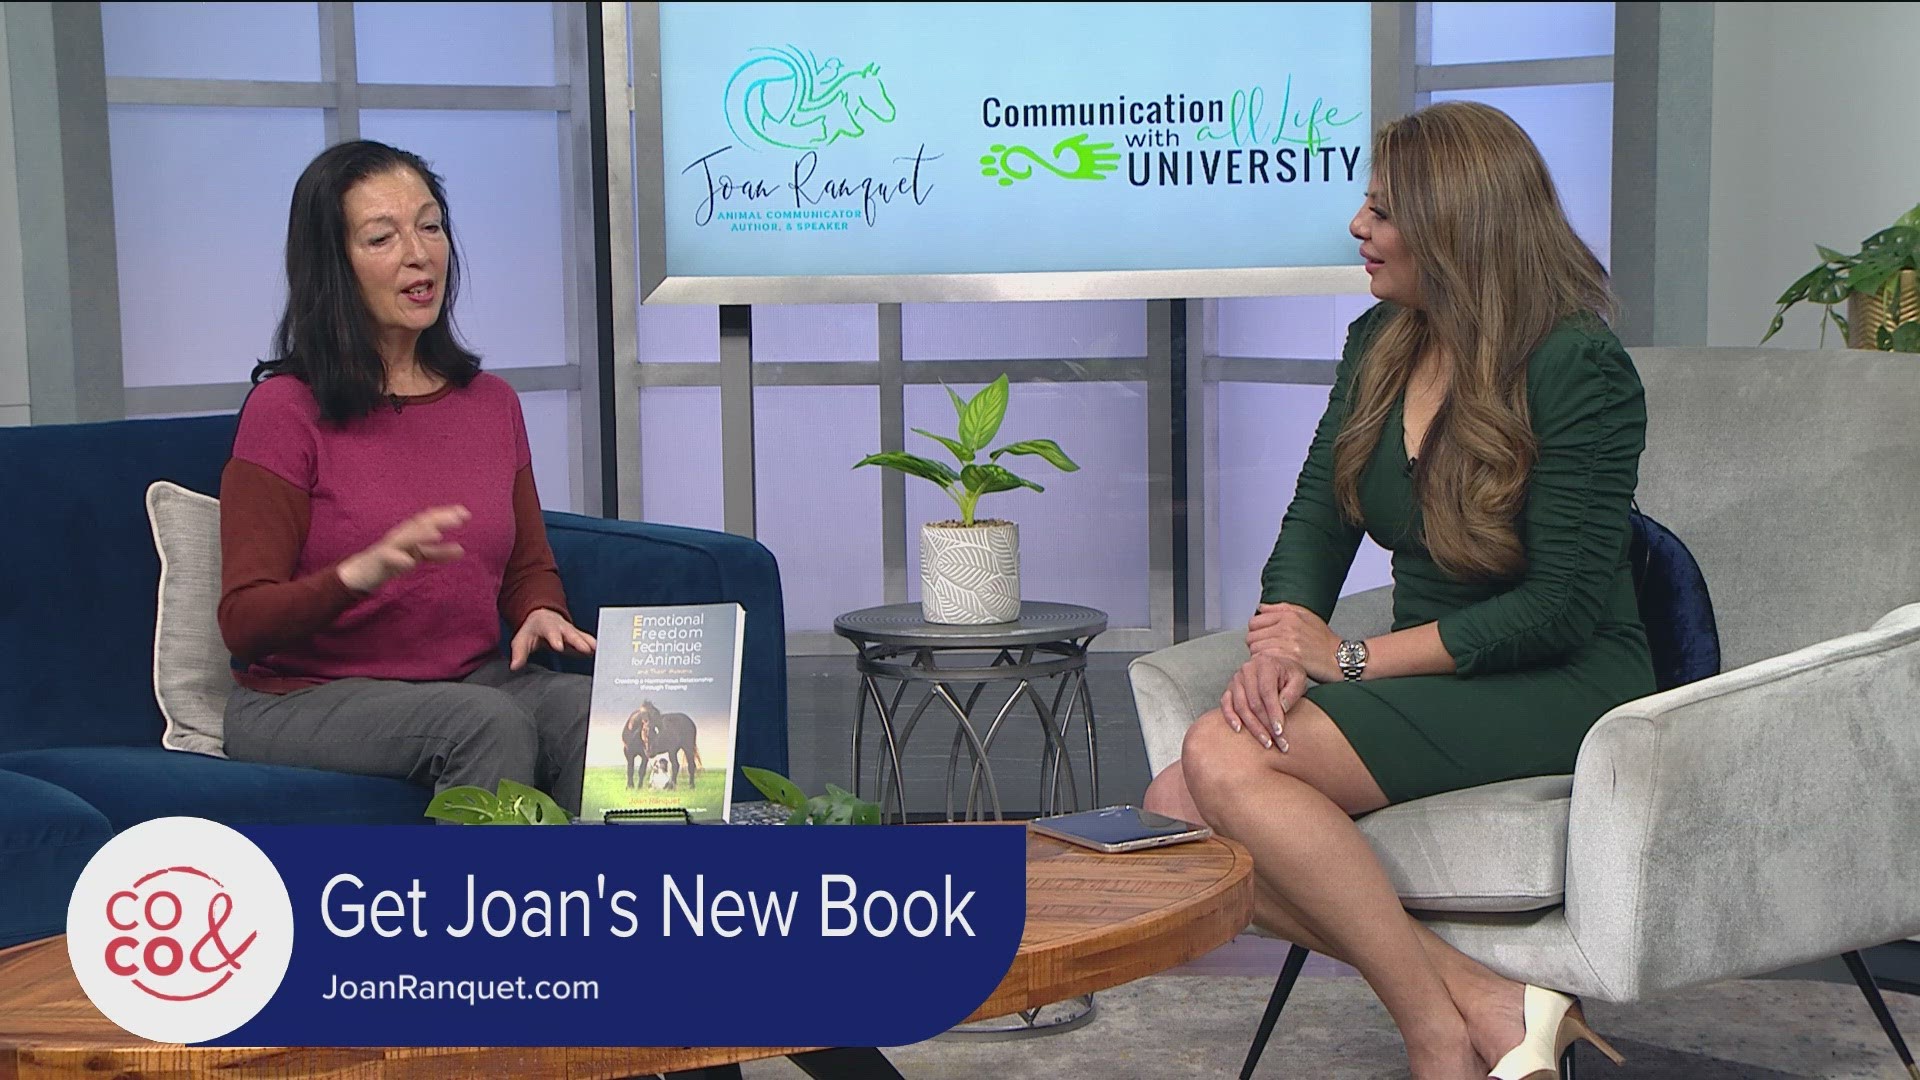 Learn more about Joan and pick up a copy of her book at JoanRanquet.com.